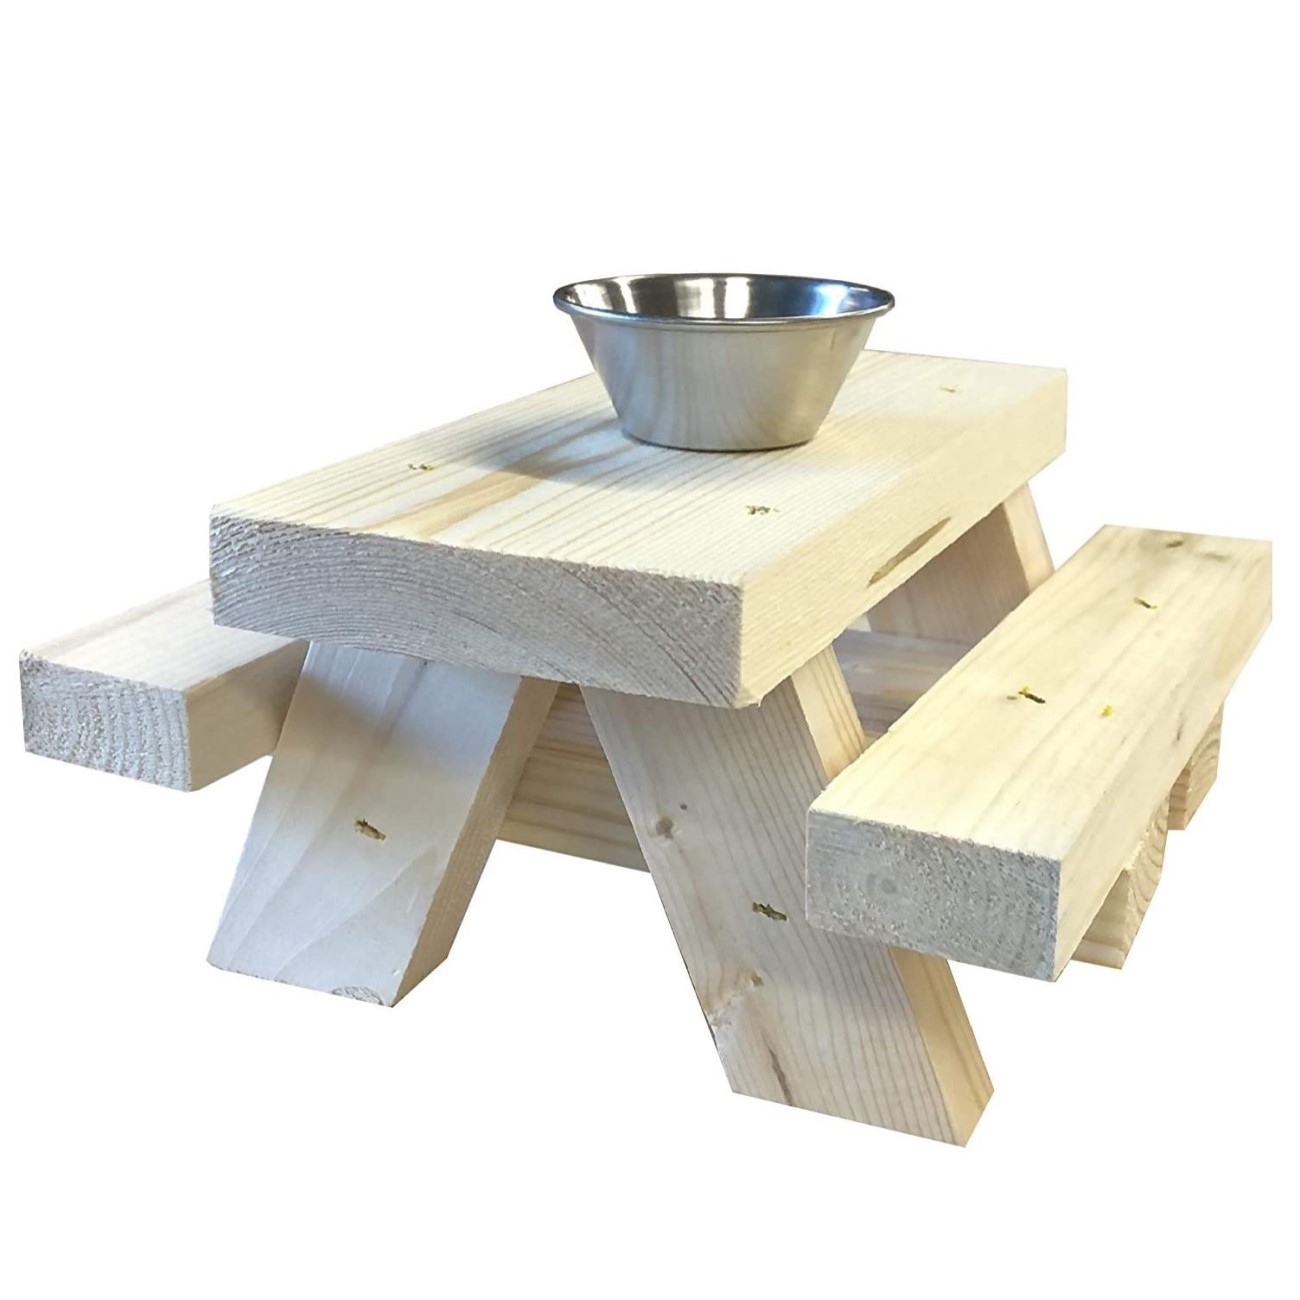 SquirrelSupply.com - Squirrel-Feeder-Picnic-Table-with-Cup-Feed-Floor-or-Table-Top-Mount-Large-Size-Hand-Made-in-USA-No-Tools-Required-–-Loose-Food-Feeder-for-Corn-or-Seed-1